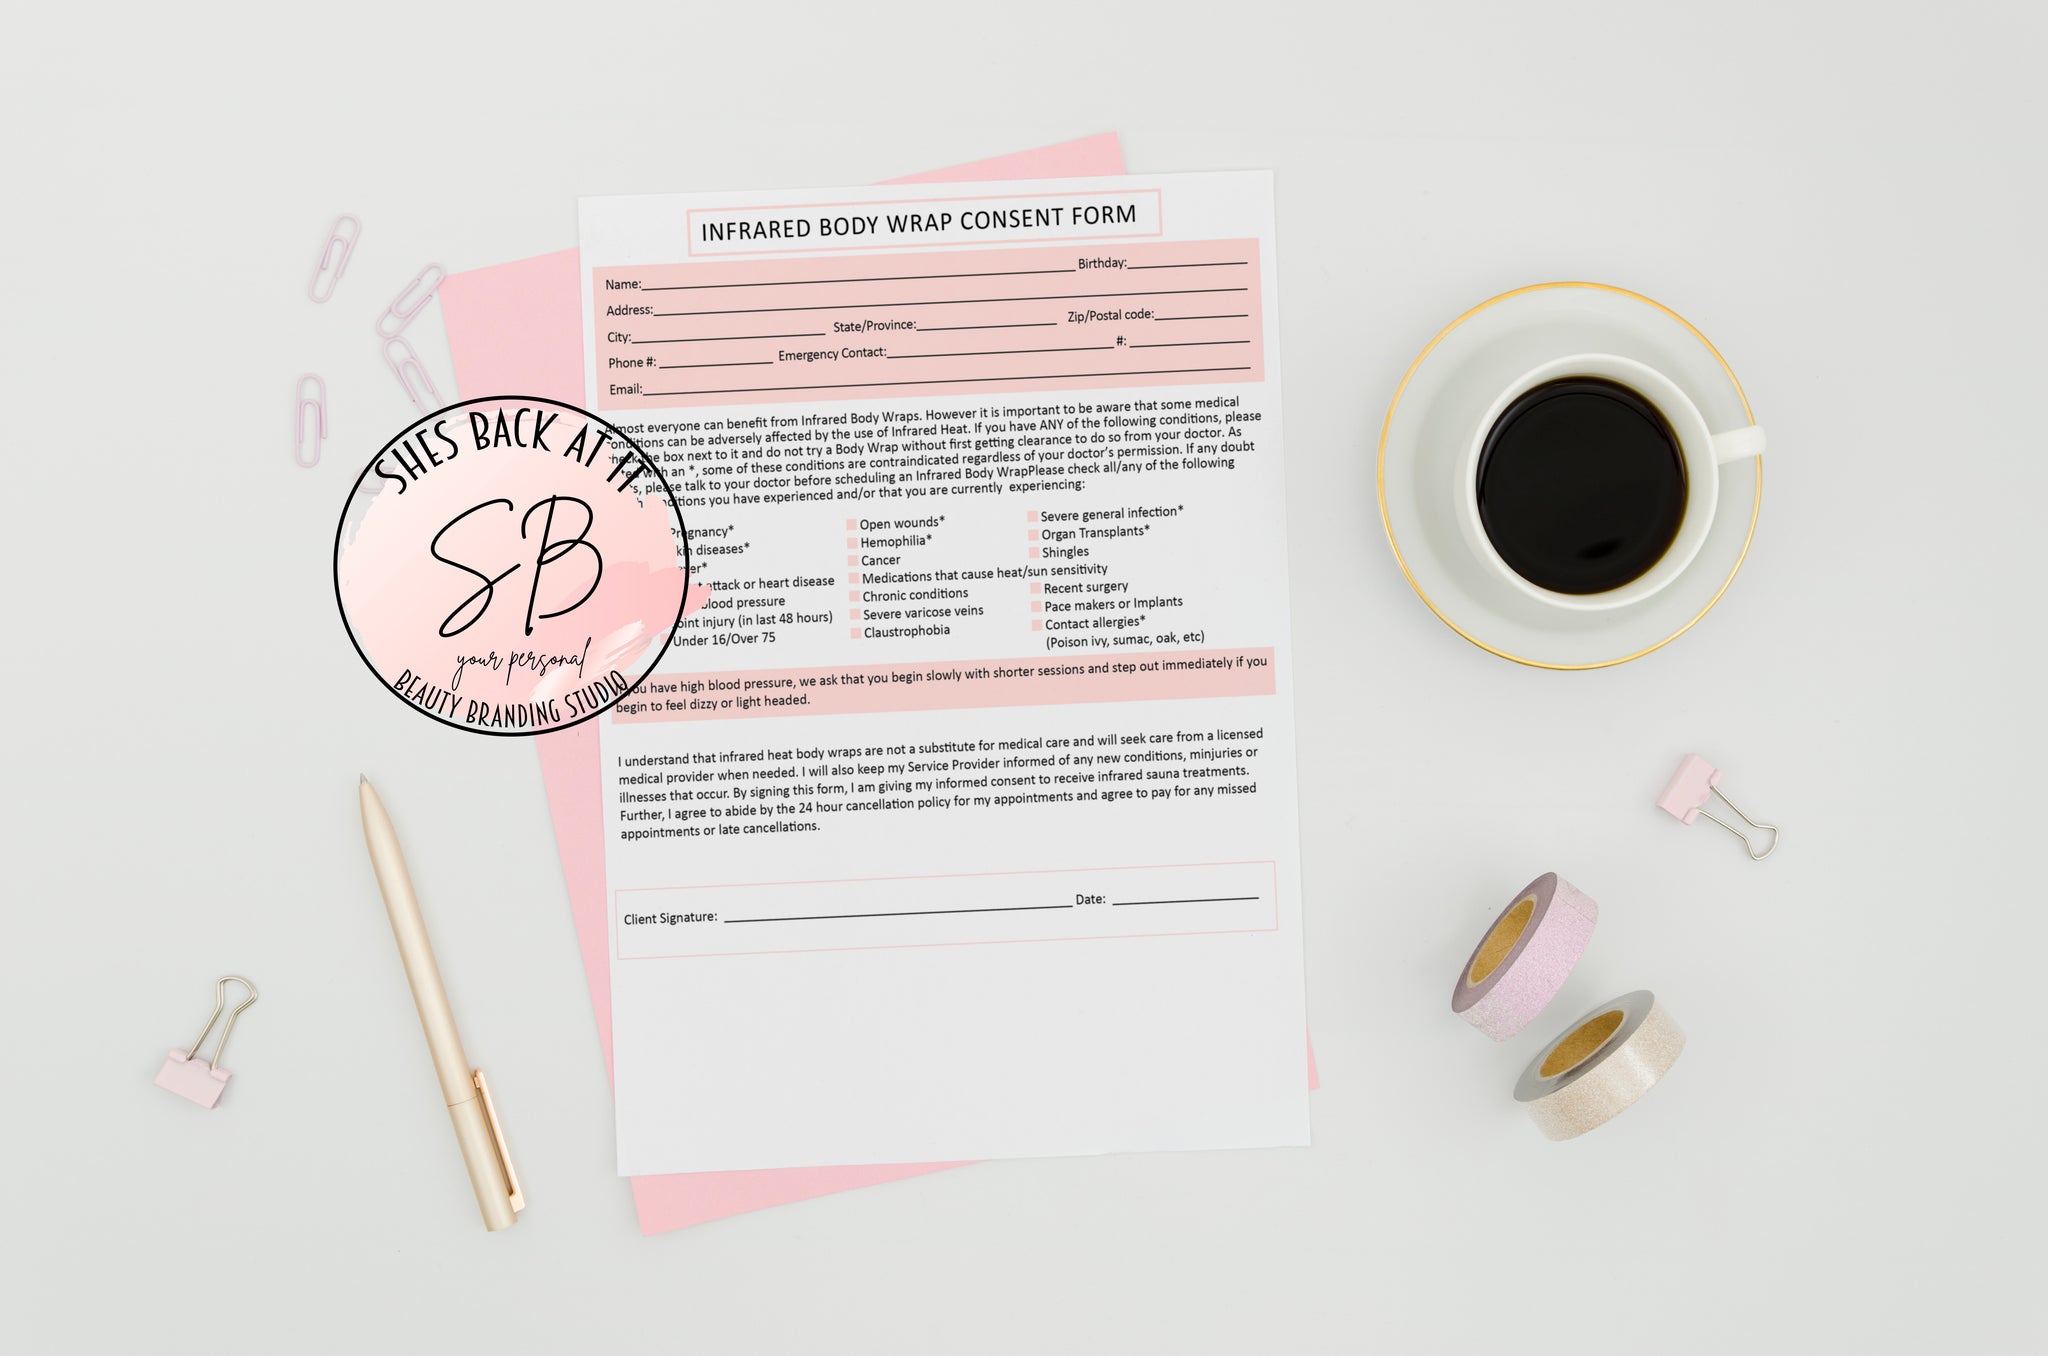 Infrared Body Wrap Consent Form